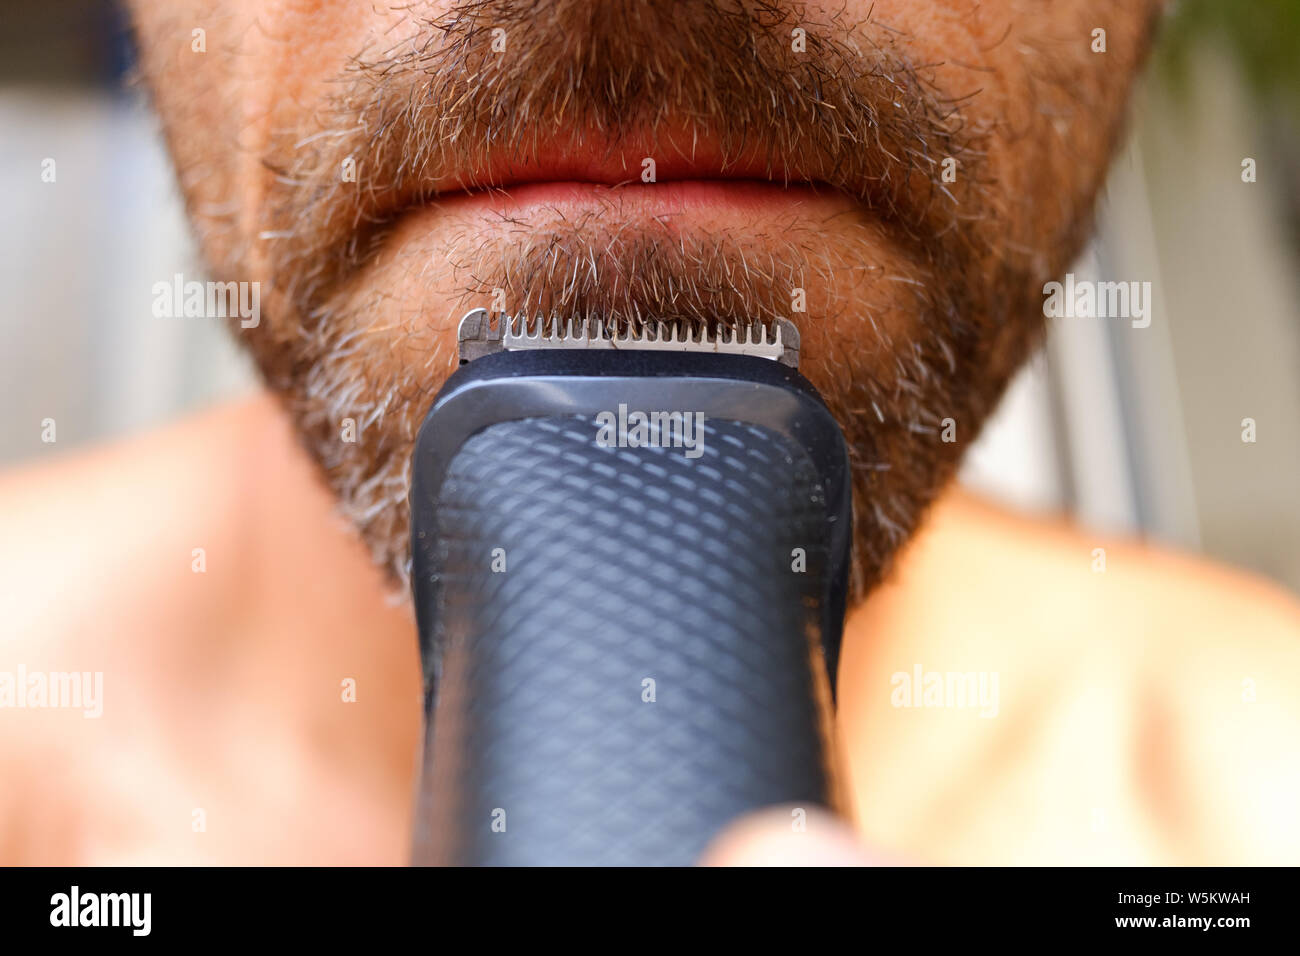 how to trim facial hair with clippers